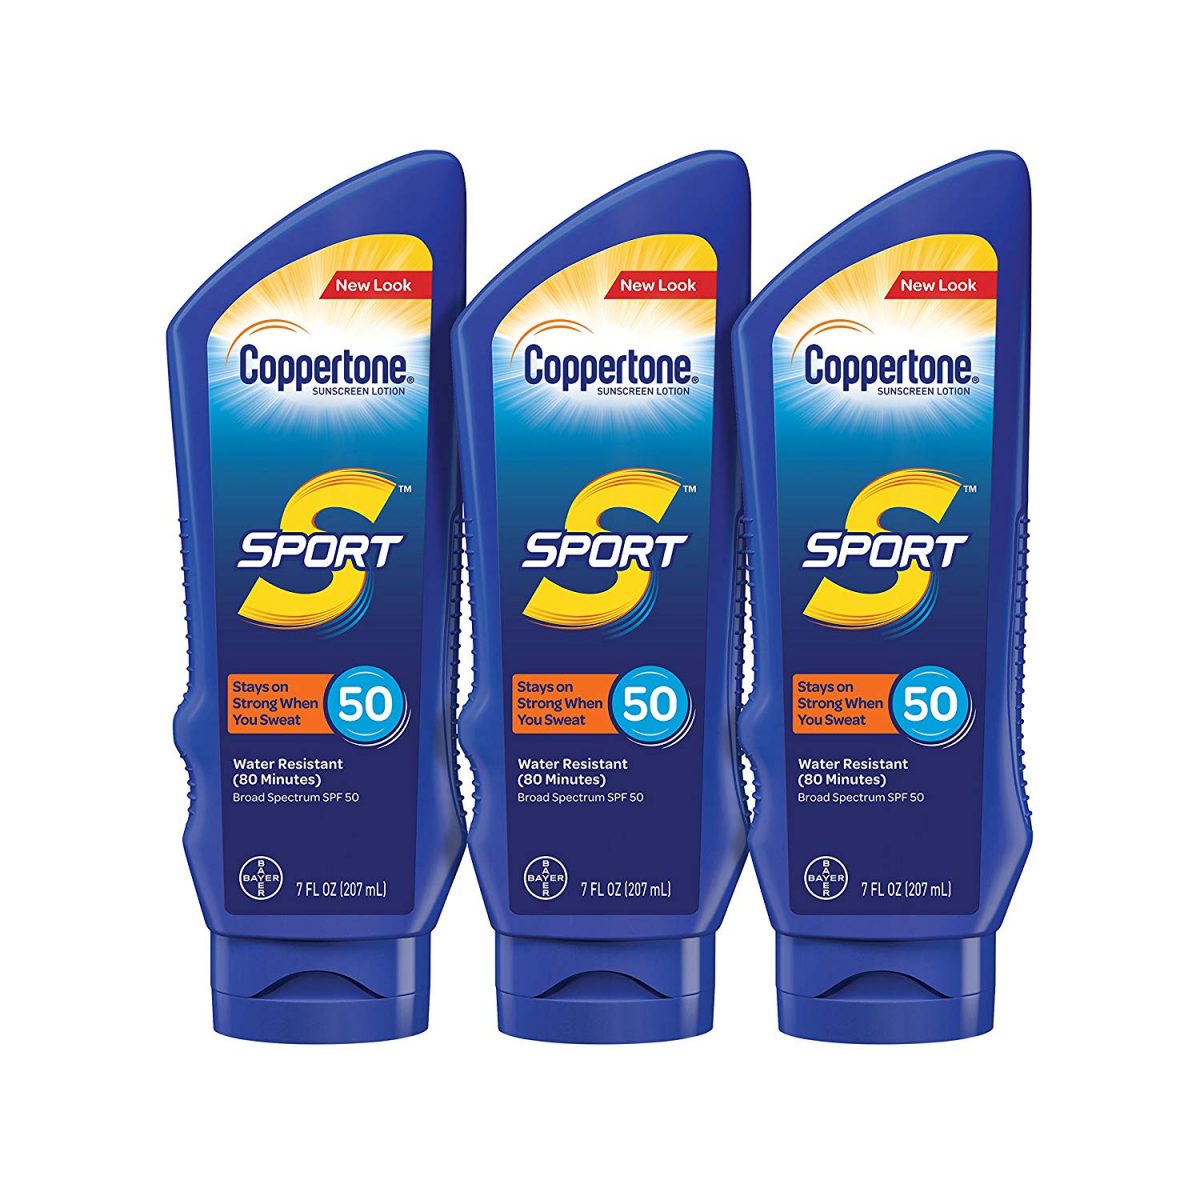 Copperstone Sunscreen